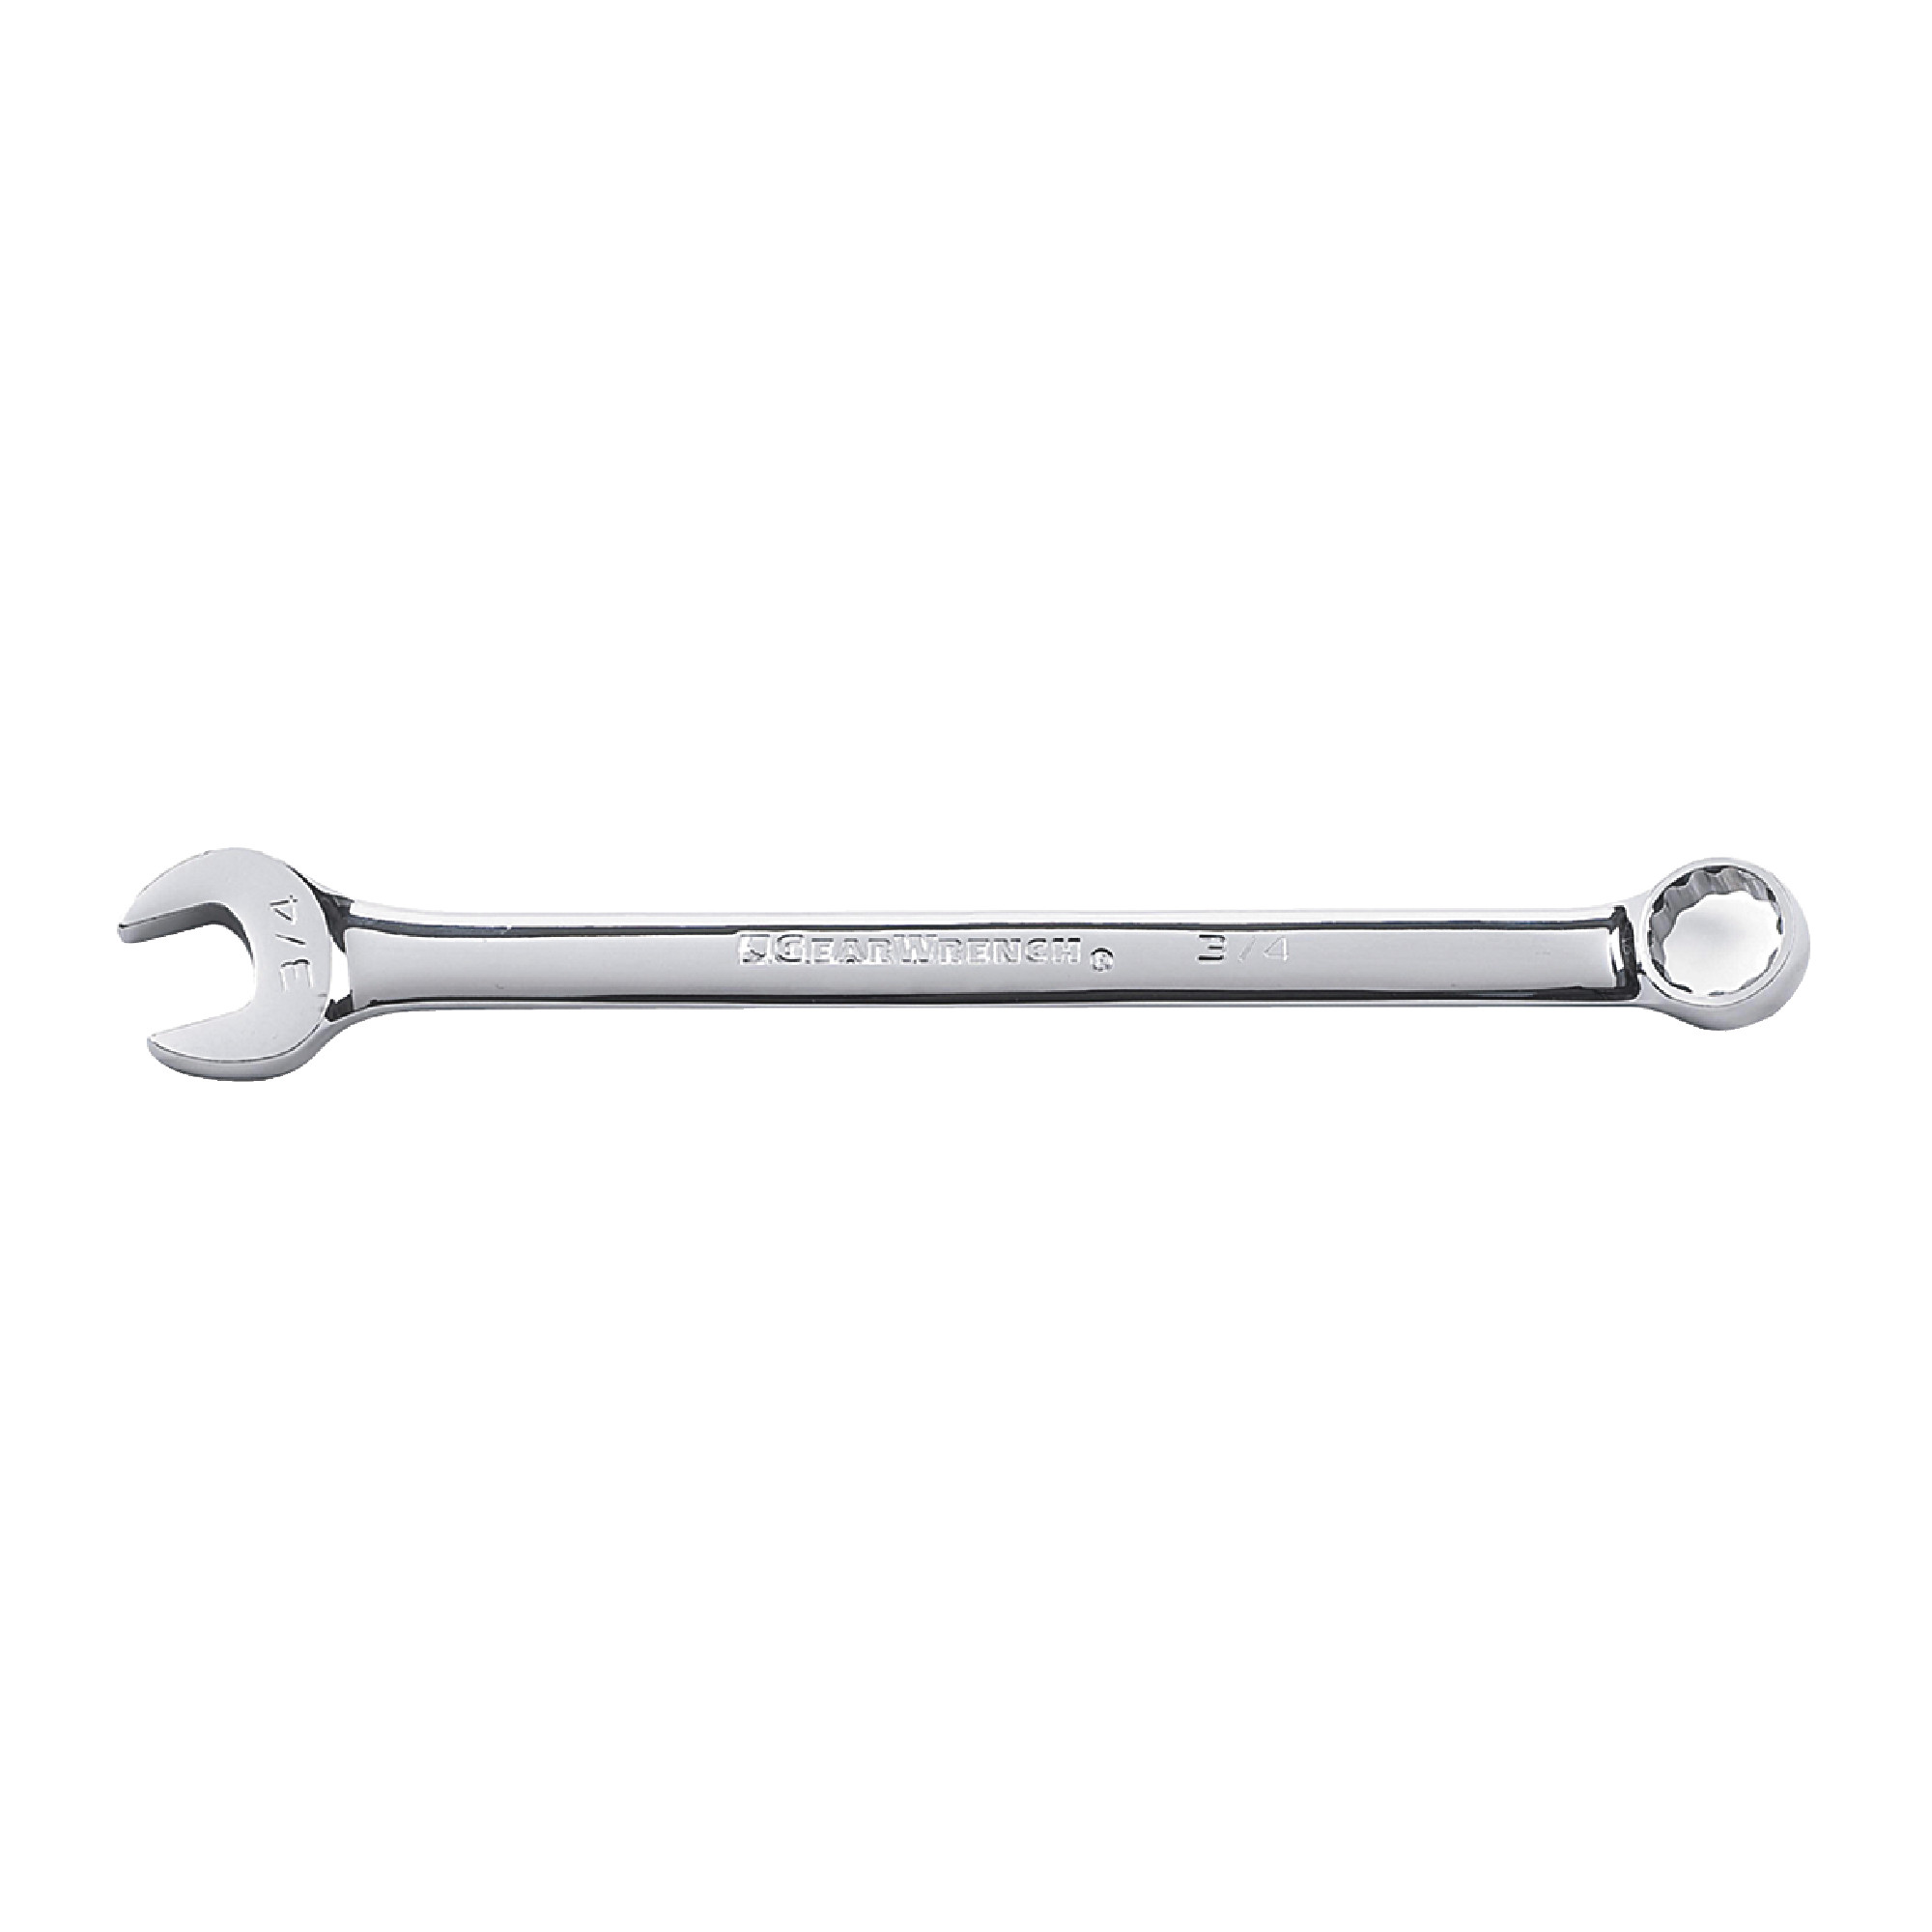 14mm 12 Point Long Pattern Combination Wrench